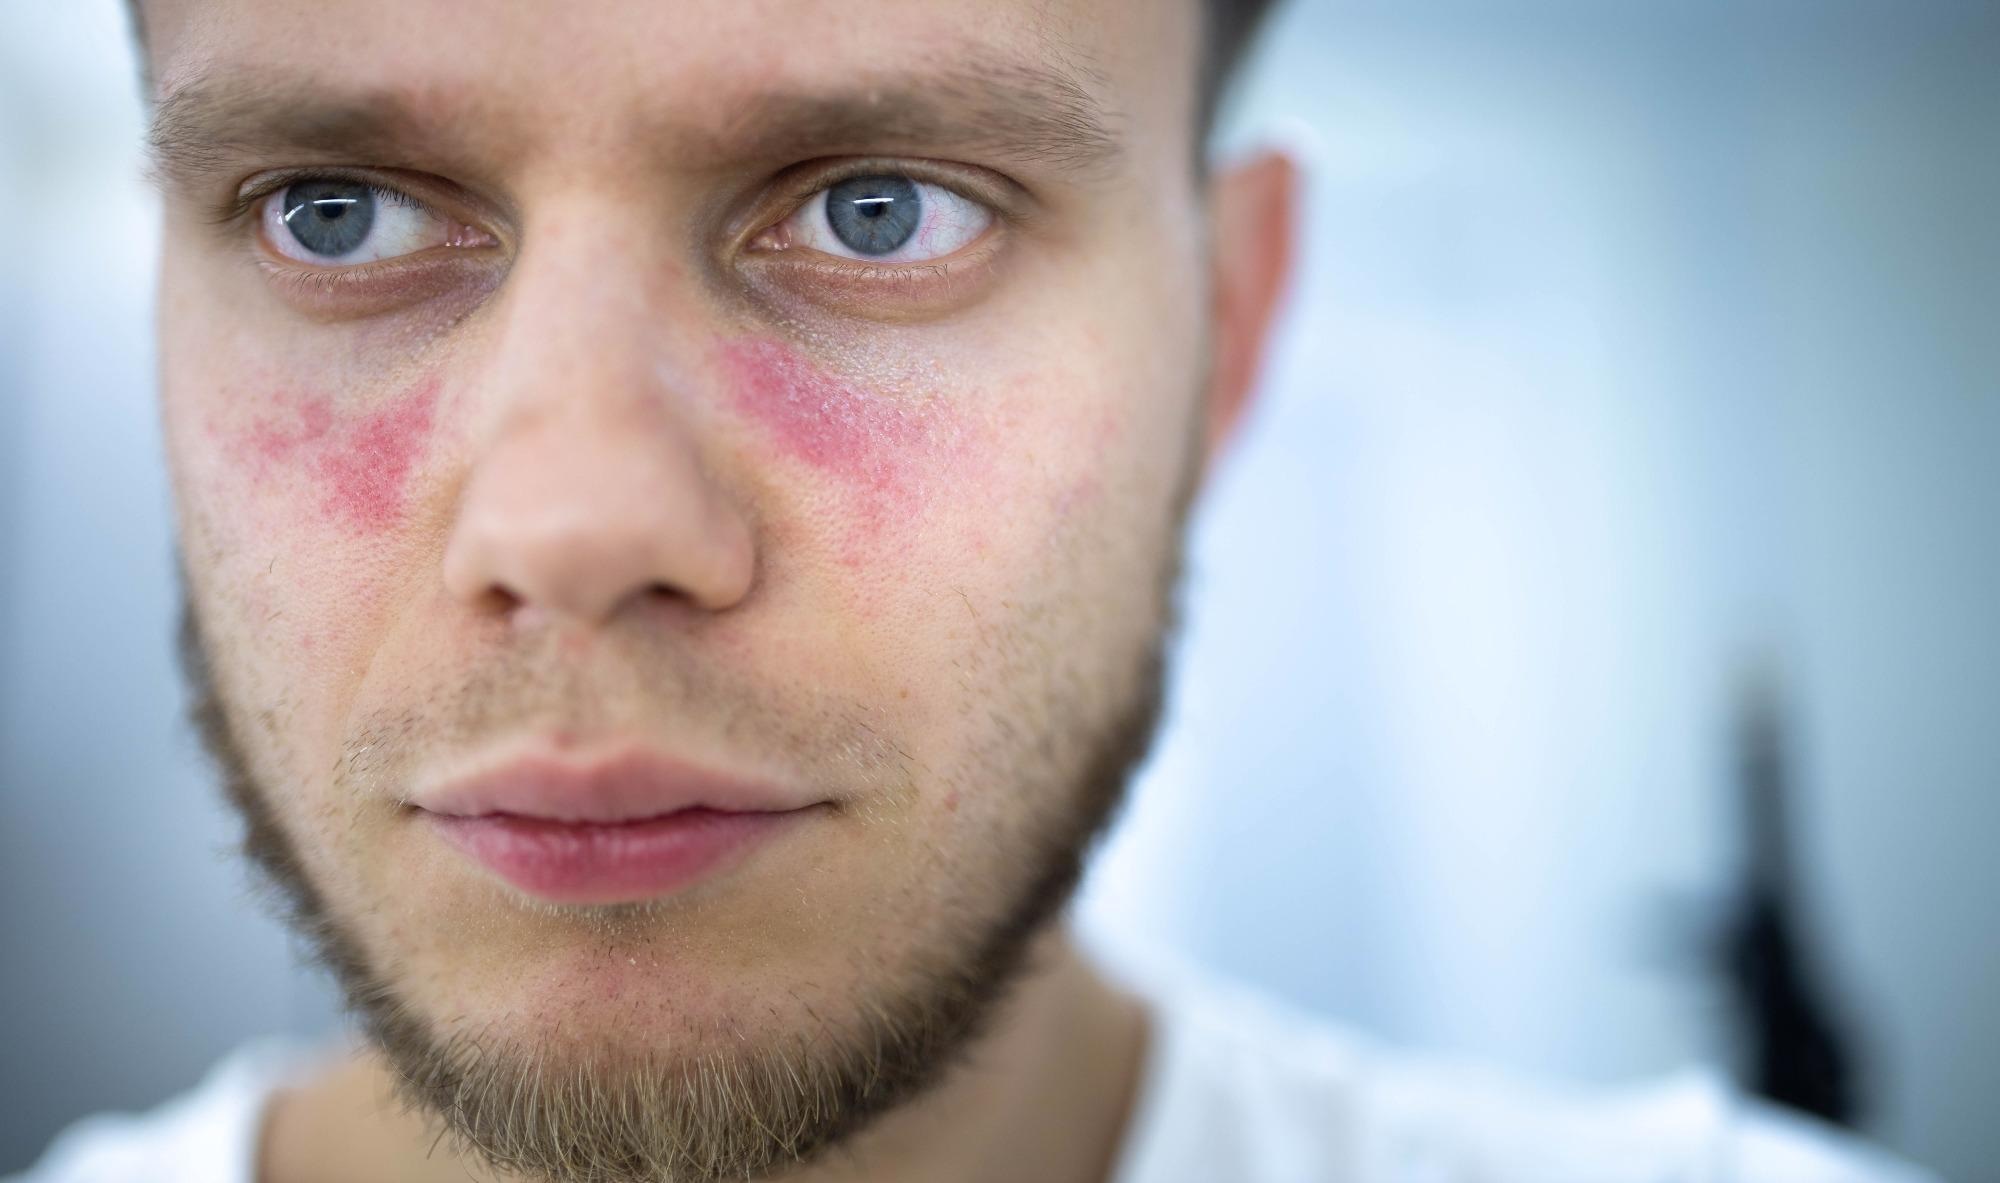 Age spots of redness on the face  from systemic lupus erythematosus. Image Credit: Velimir Zeland / Shutterstock